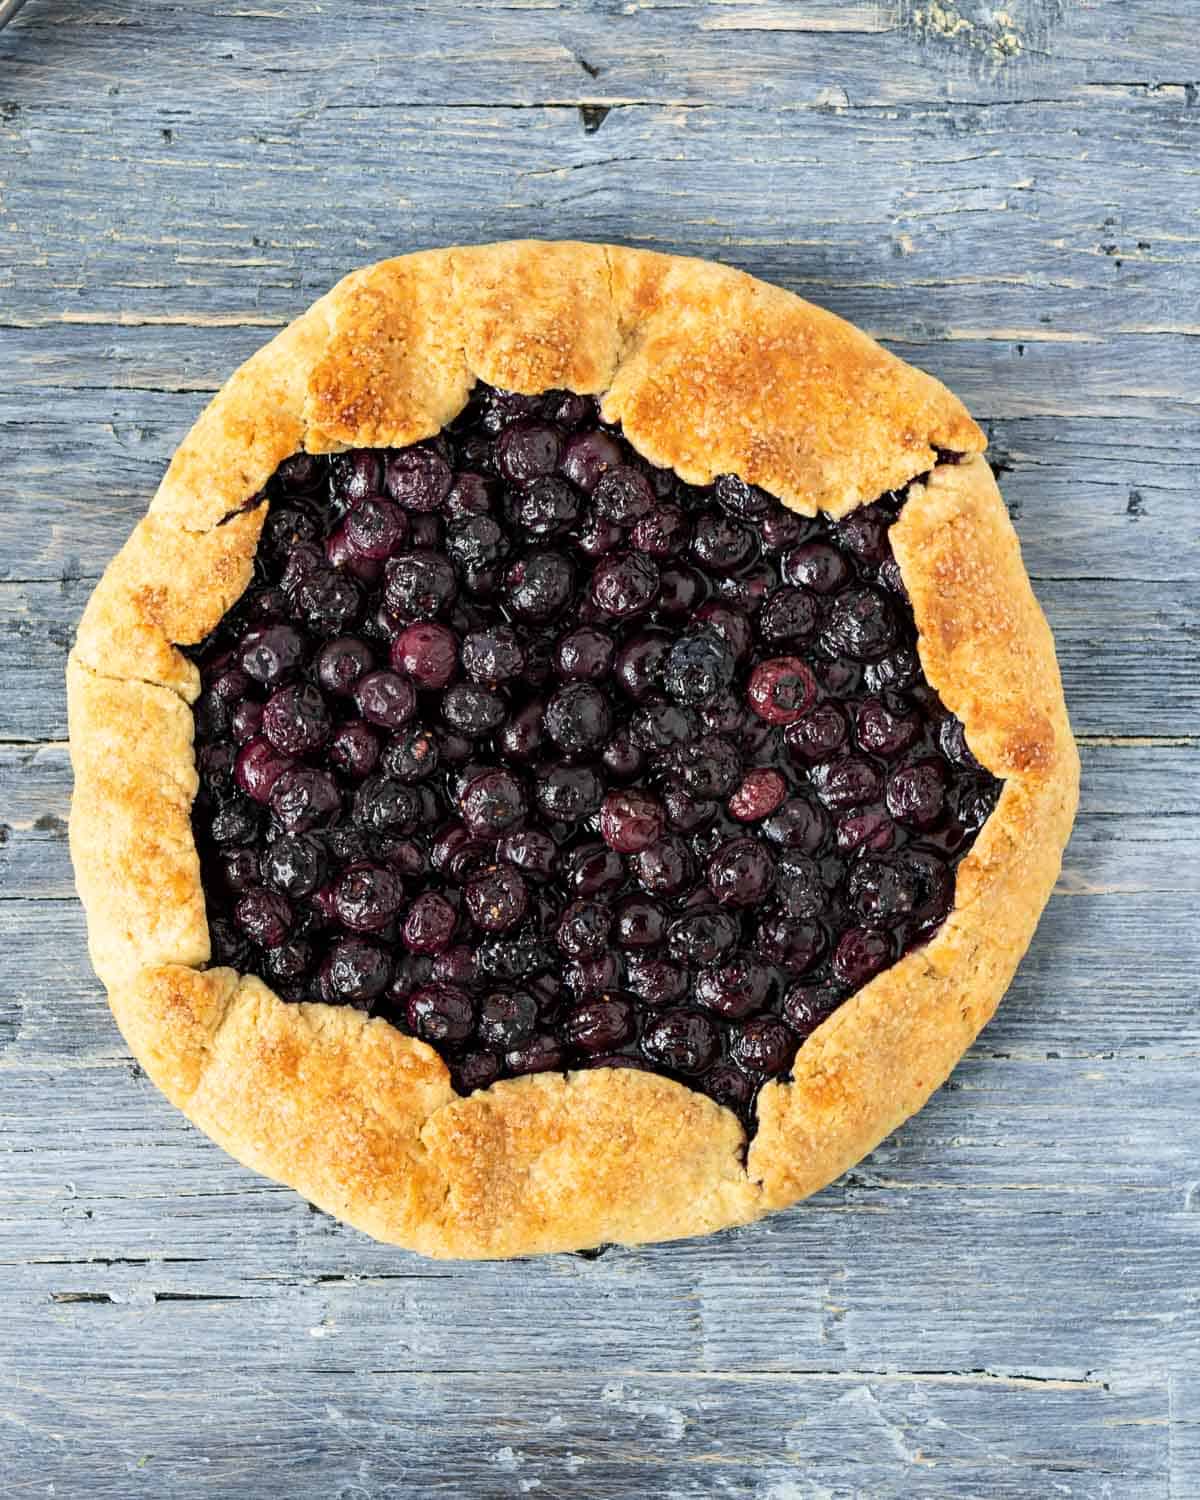 A Blueberries Galette on a blue rustic table shown from above. The galette has a lot of blueberries baked inside